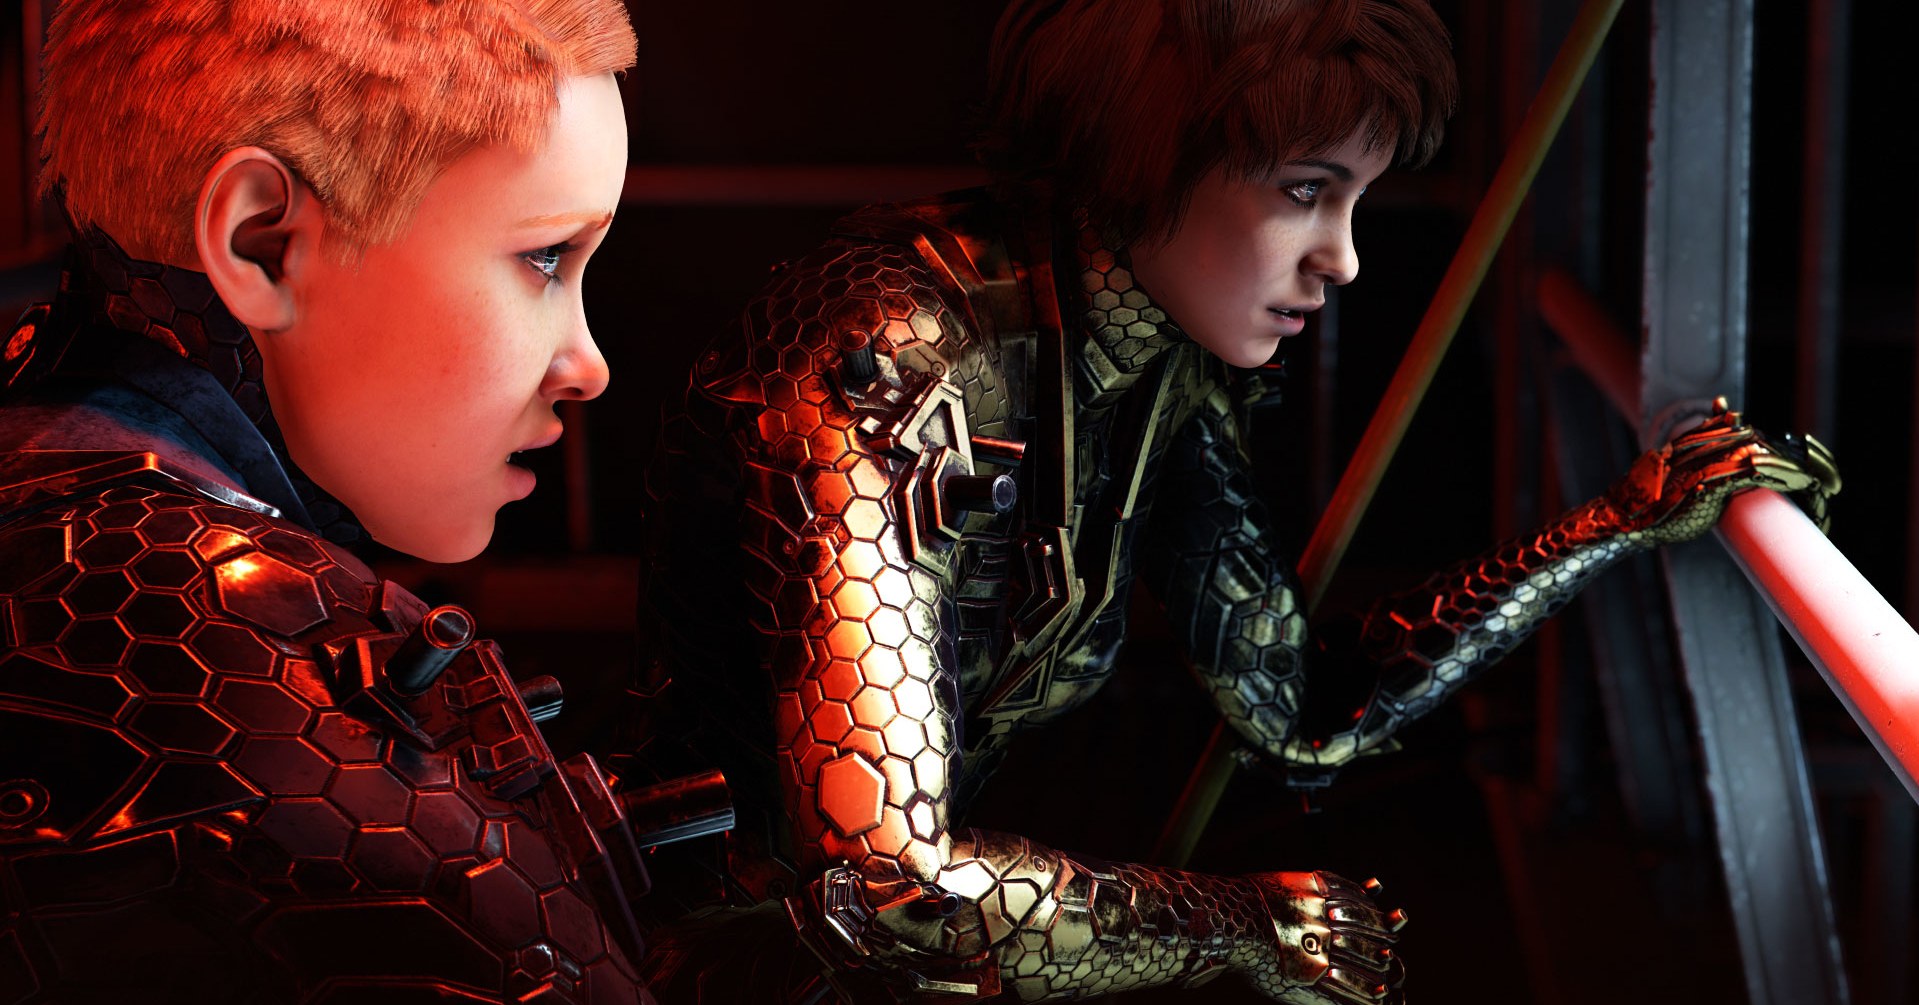 ‘Wolfenstein: Youngblood’ Is a Rare Game About Sisterhood